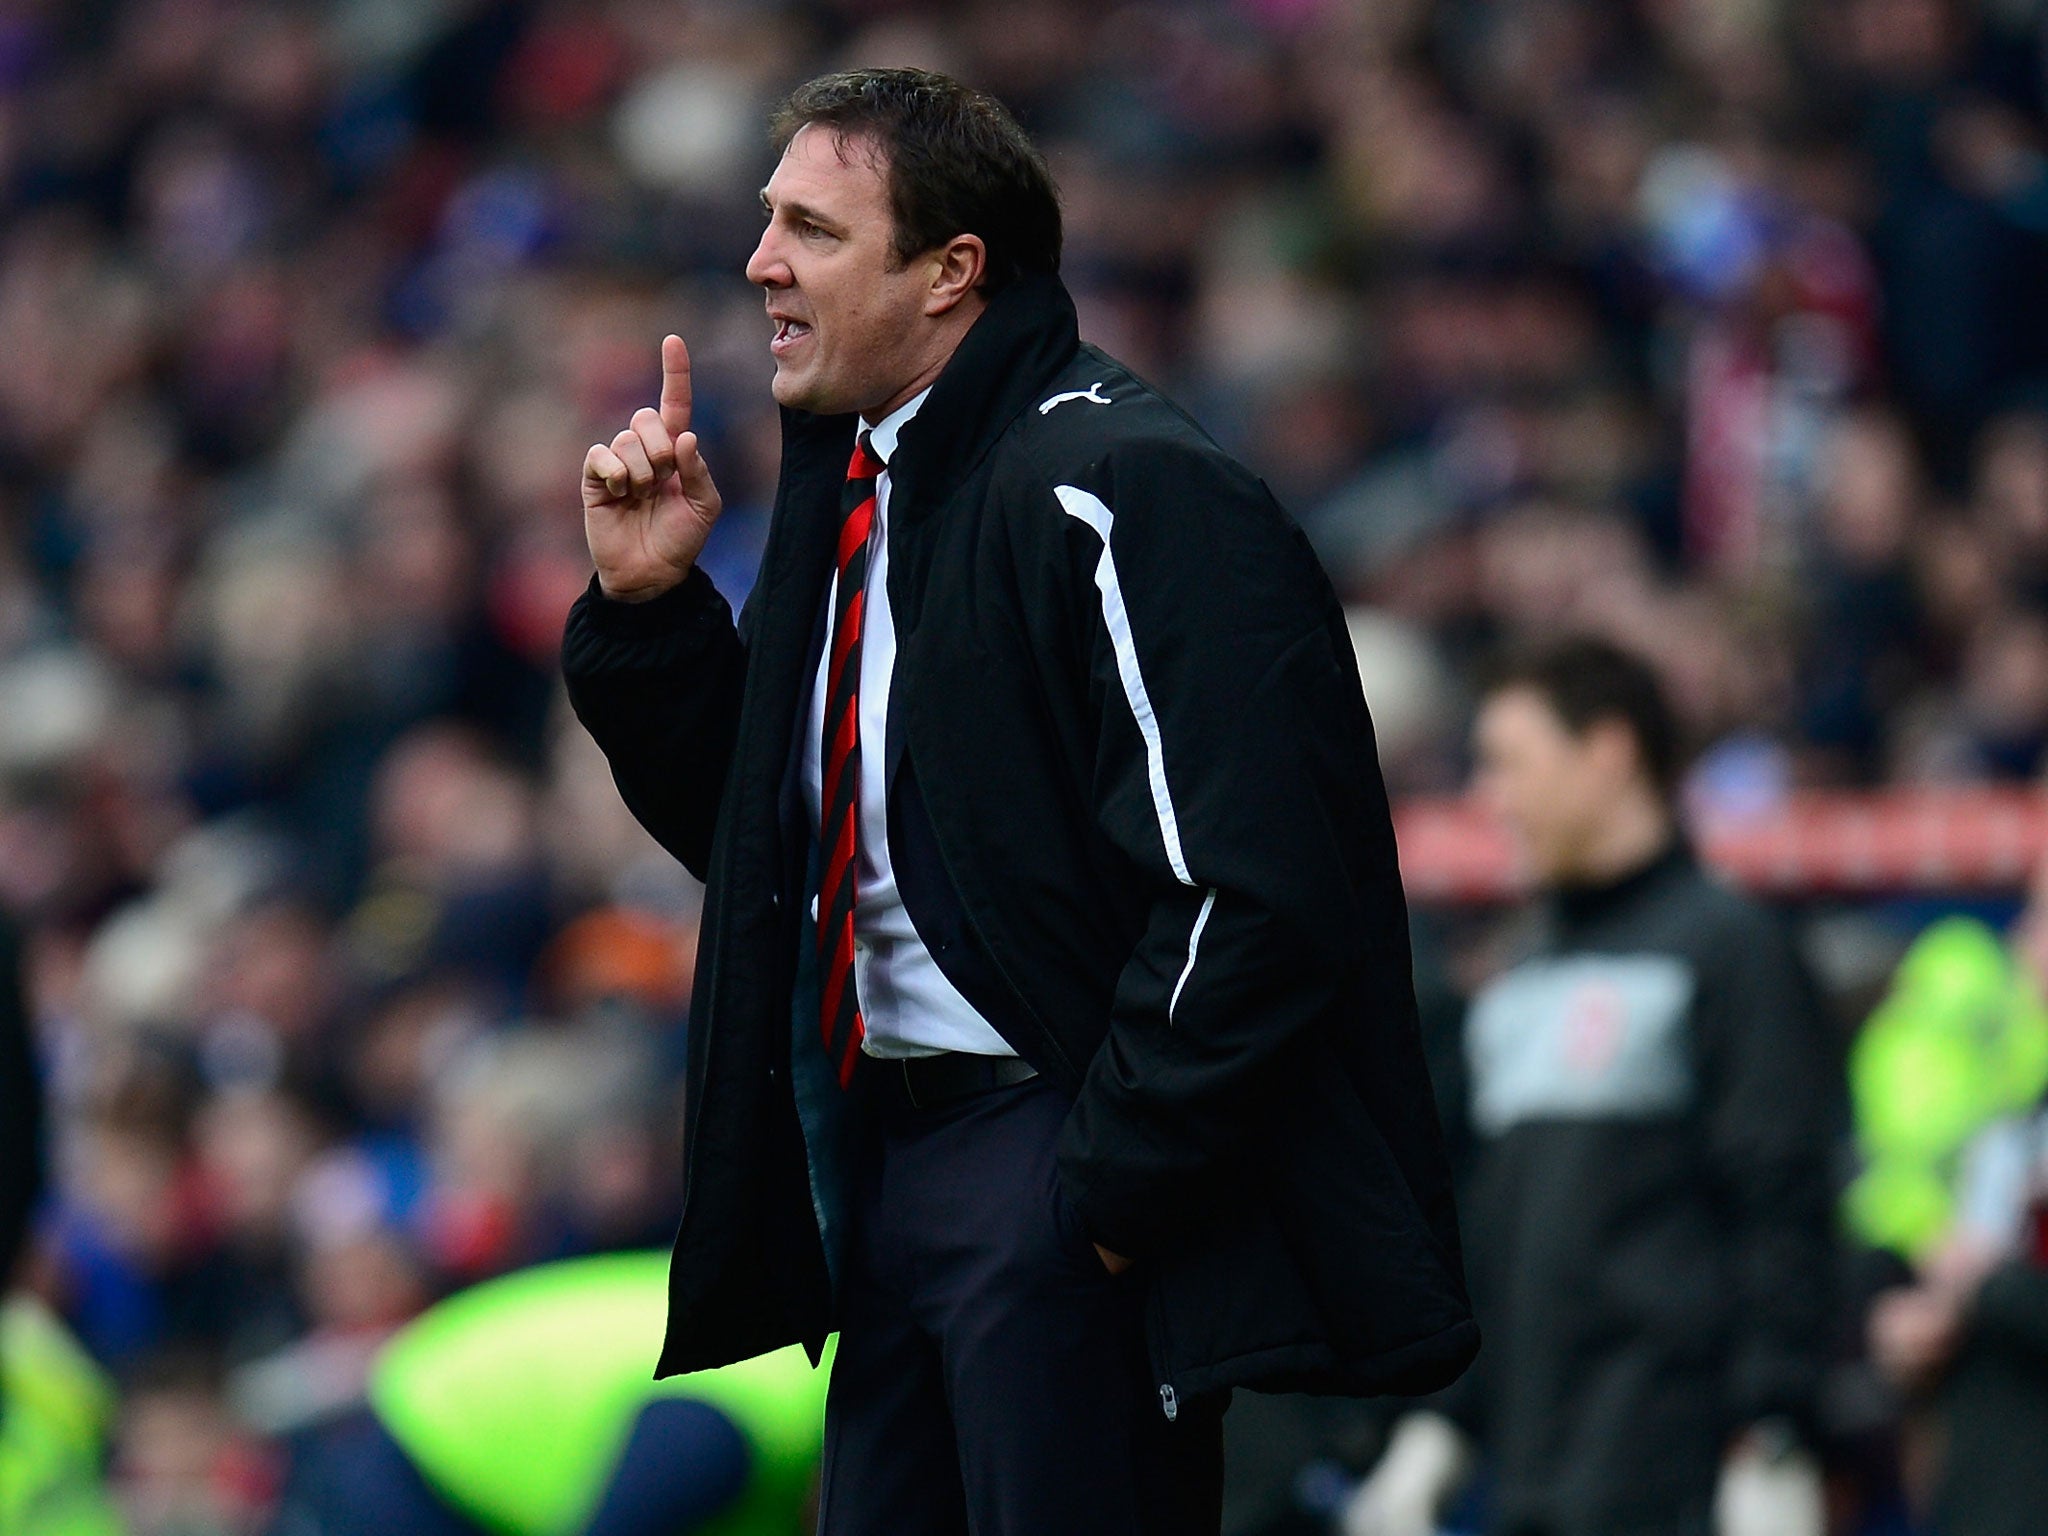 Old hand: Malky Mackay is already a veteran Premier League manager